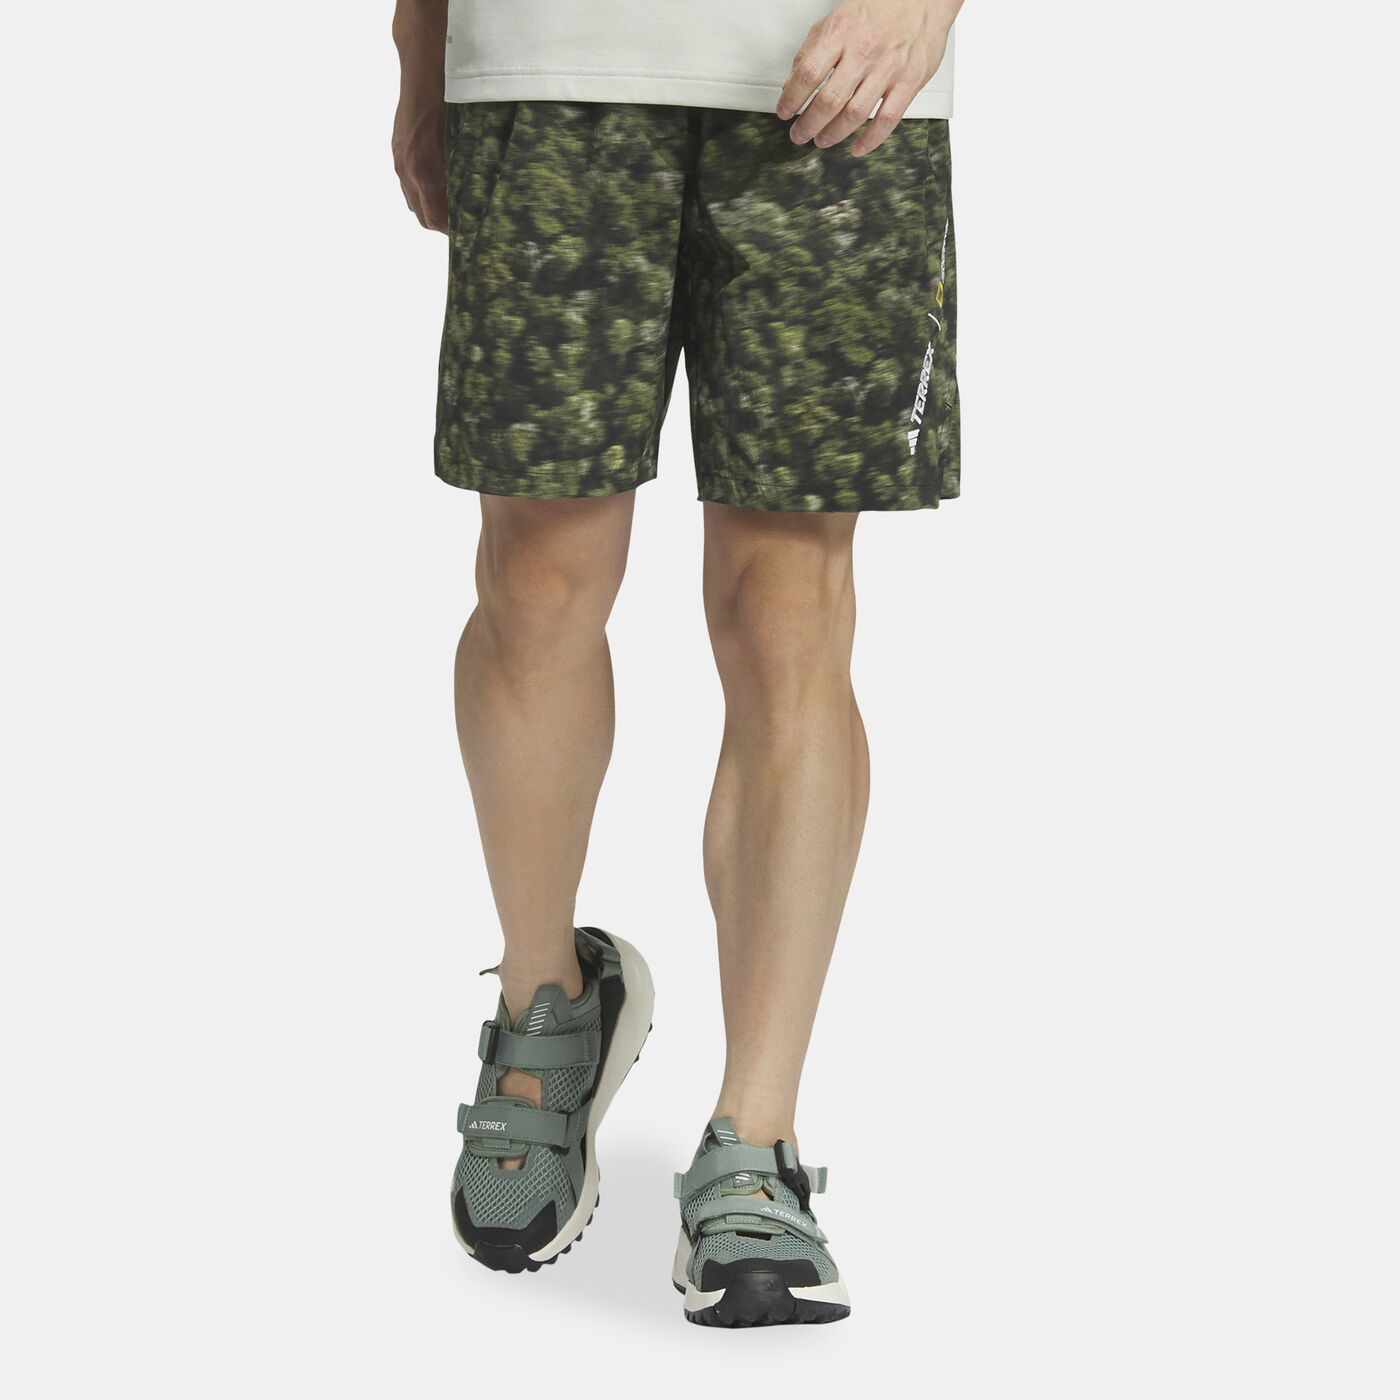 Men's National Geographic Shorts